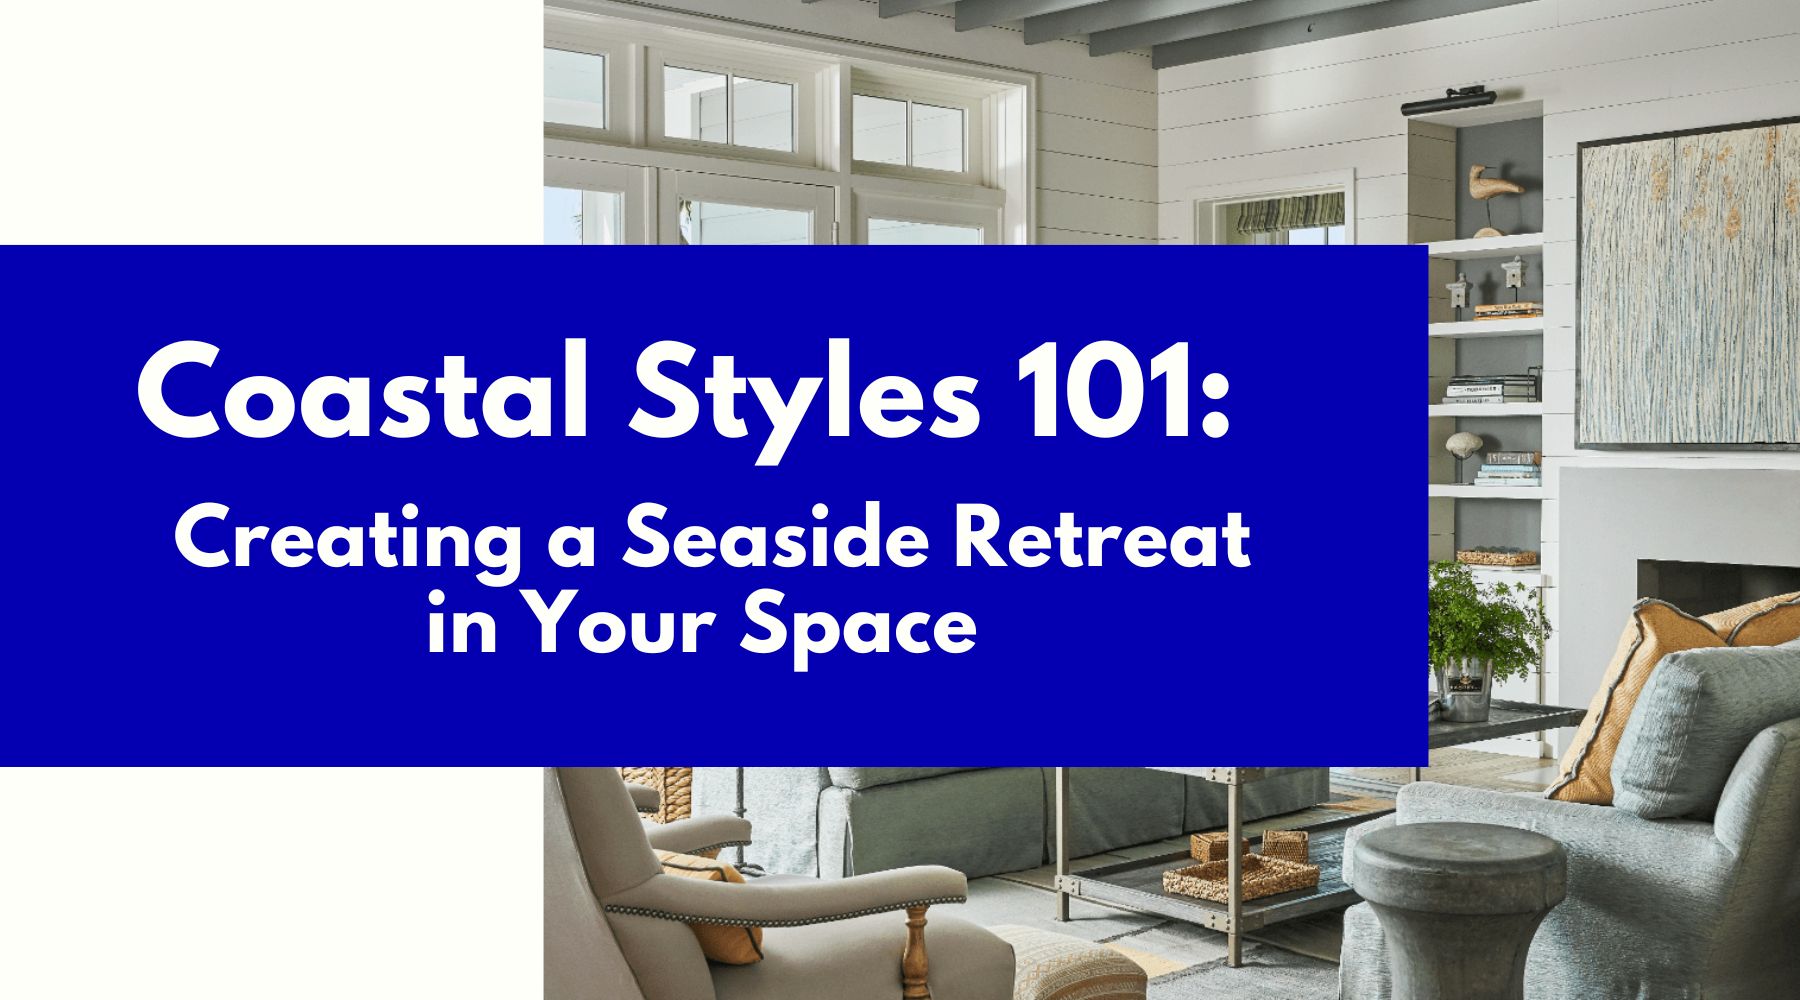 coastal styles 101: creating a seaside retreat in your space